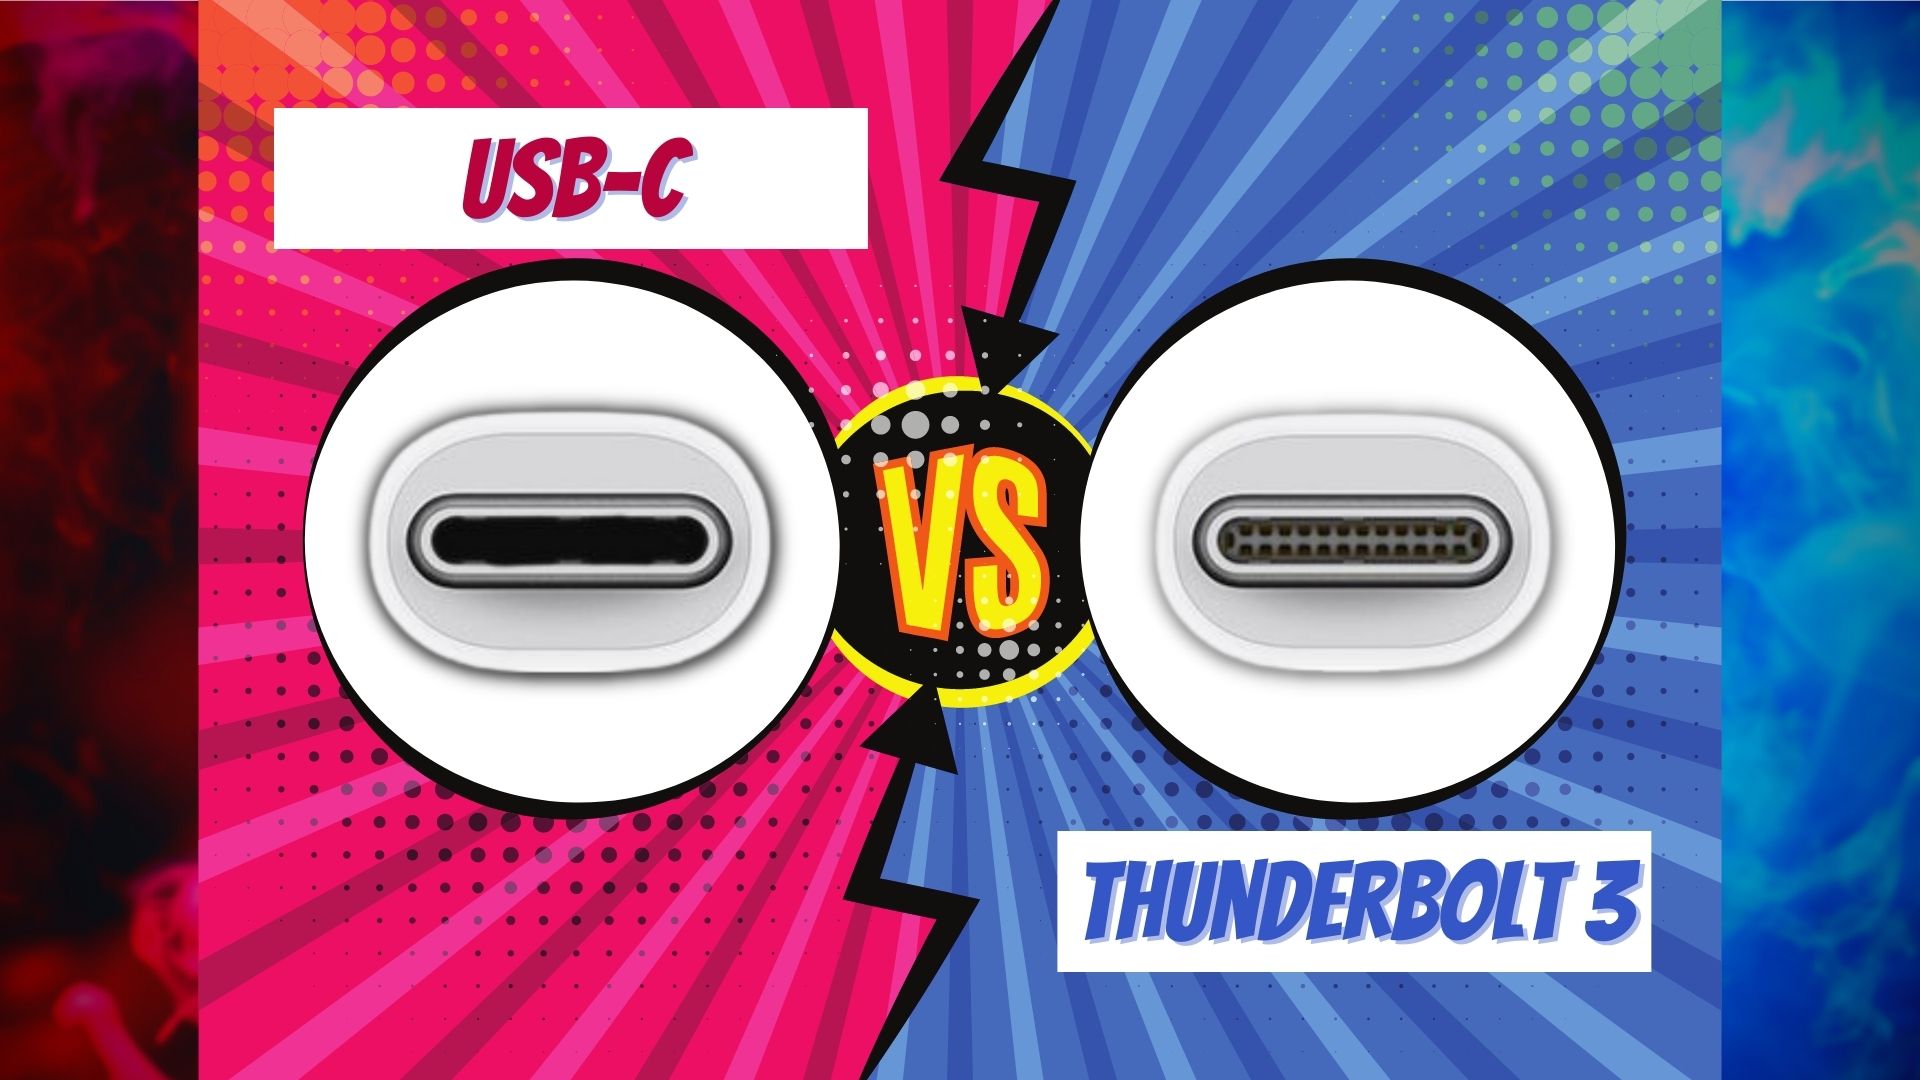 Thunderbolt 3 USB-C: What's The Difference?